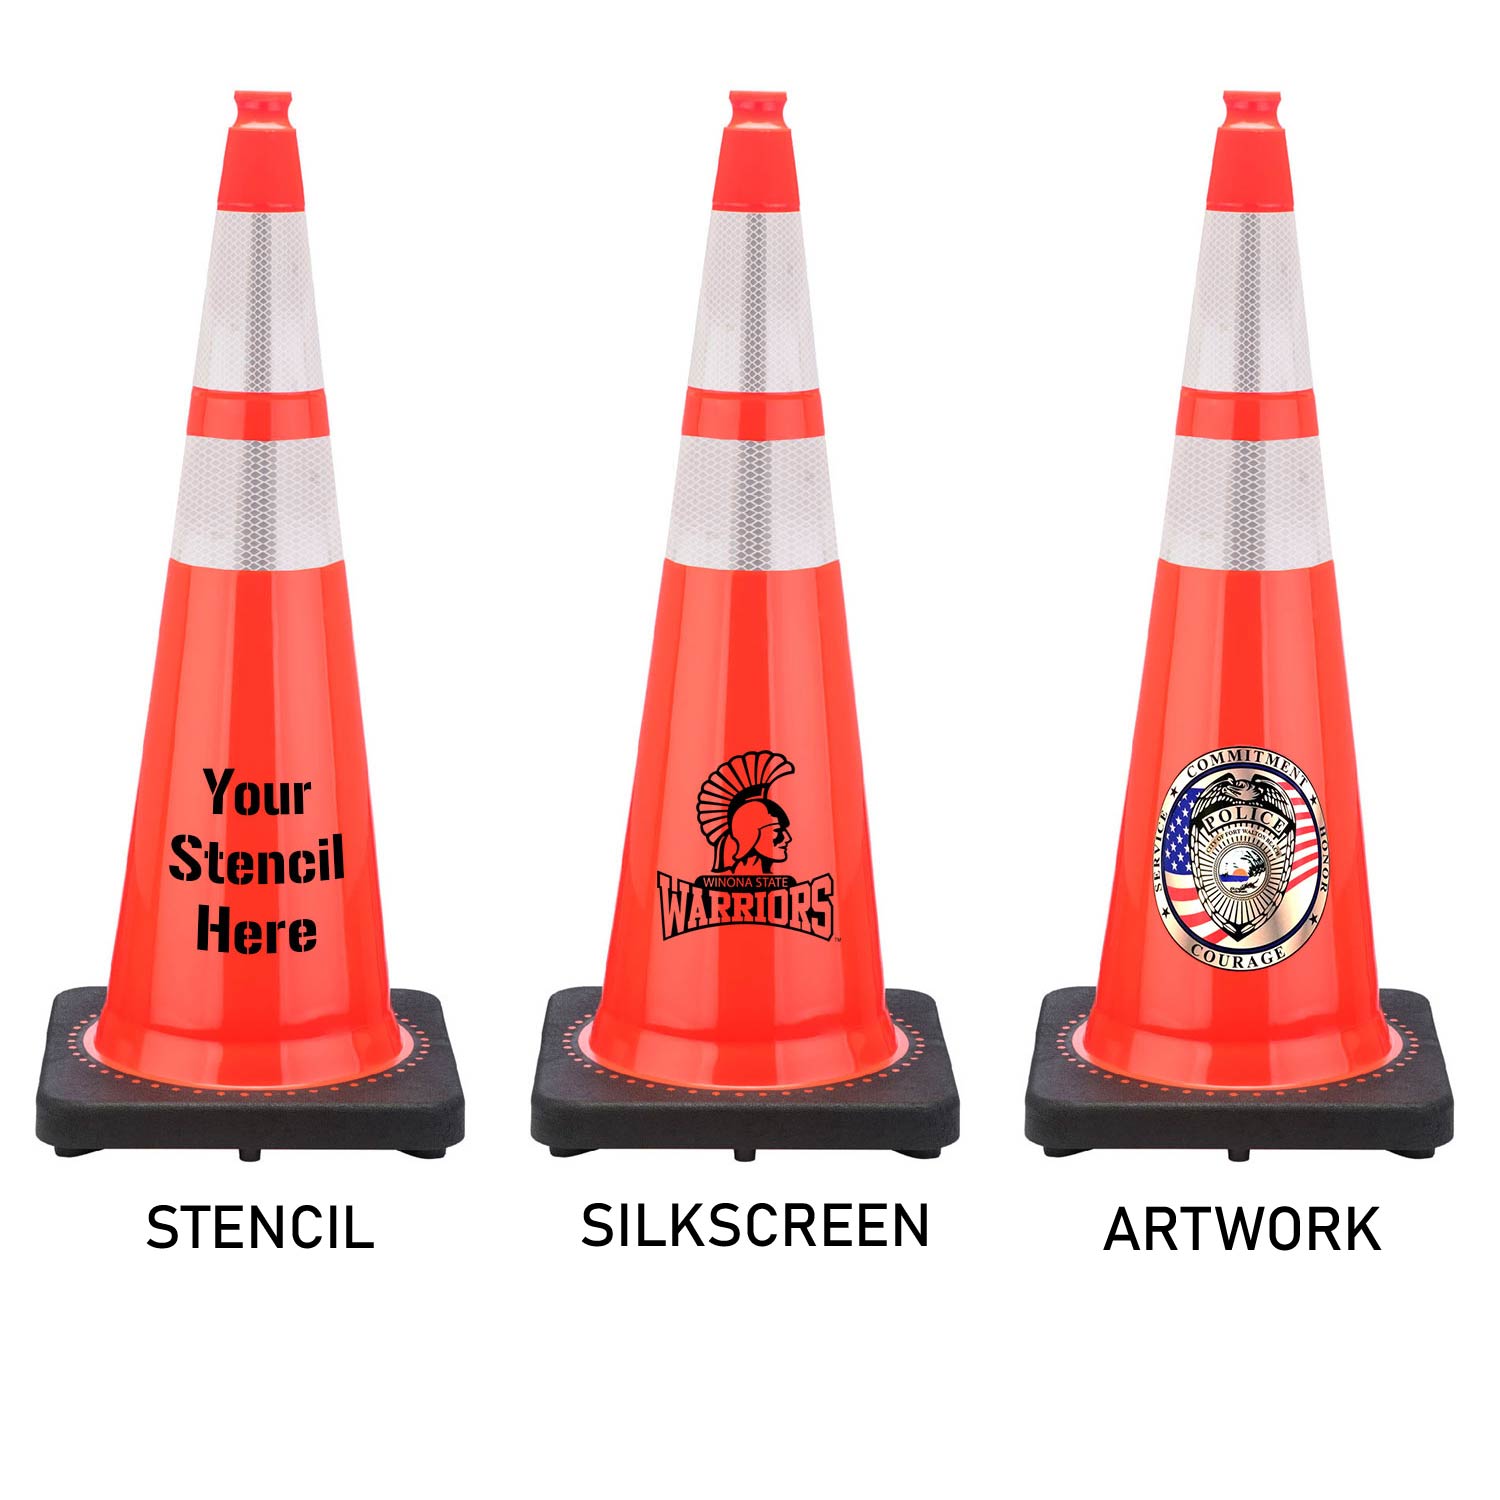 Troy Safety Lime Traffic Safety Cone 36 Black Base 6 Cones Without Reflective Tape